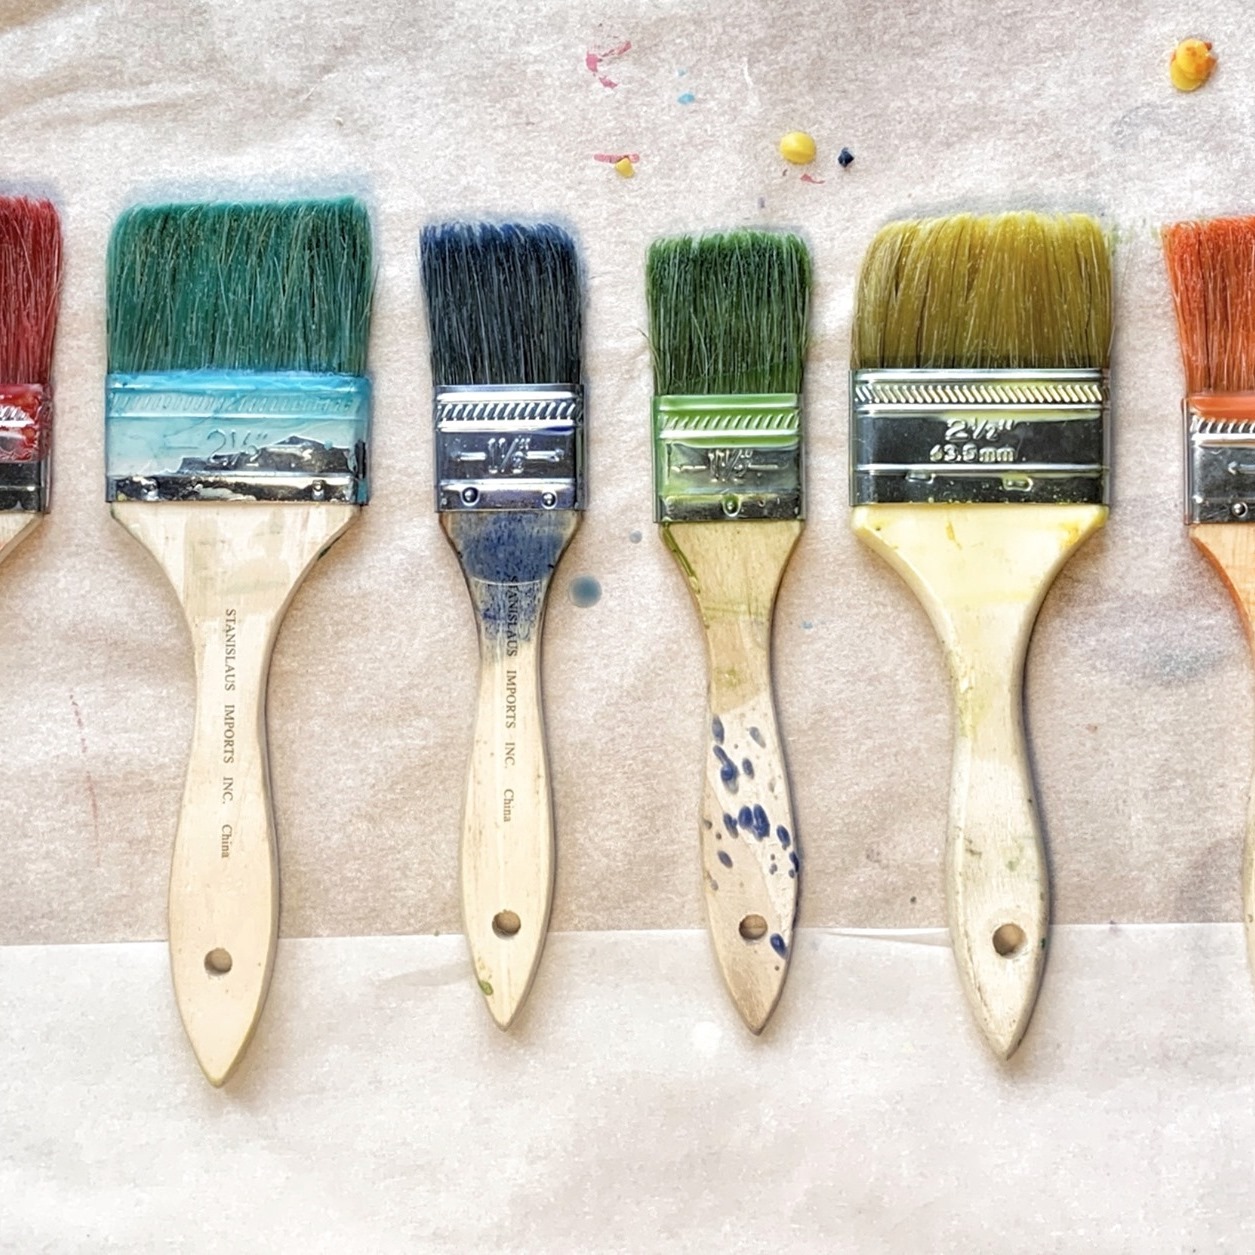 paint brushes side by side